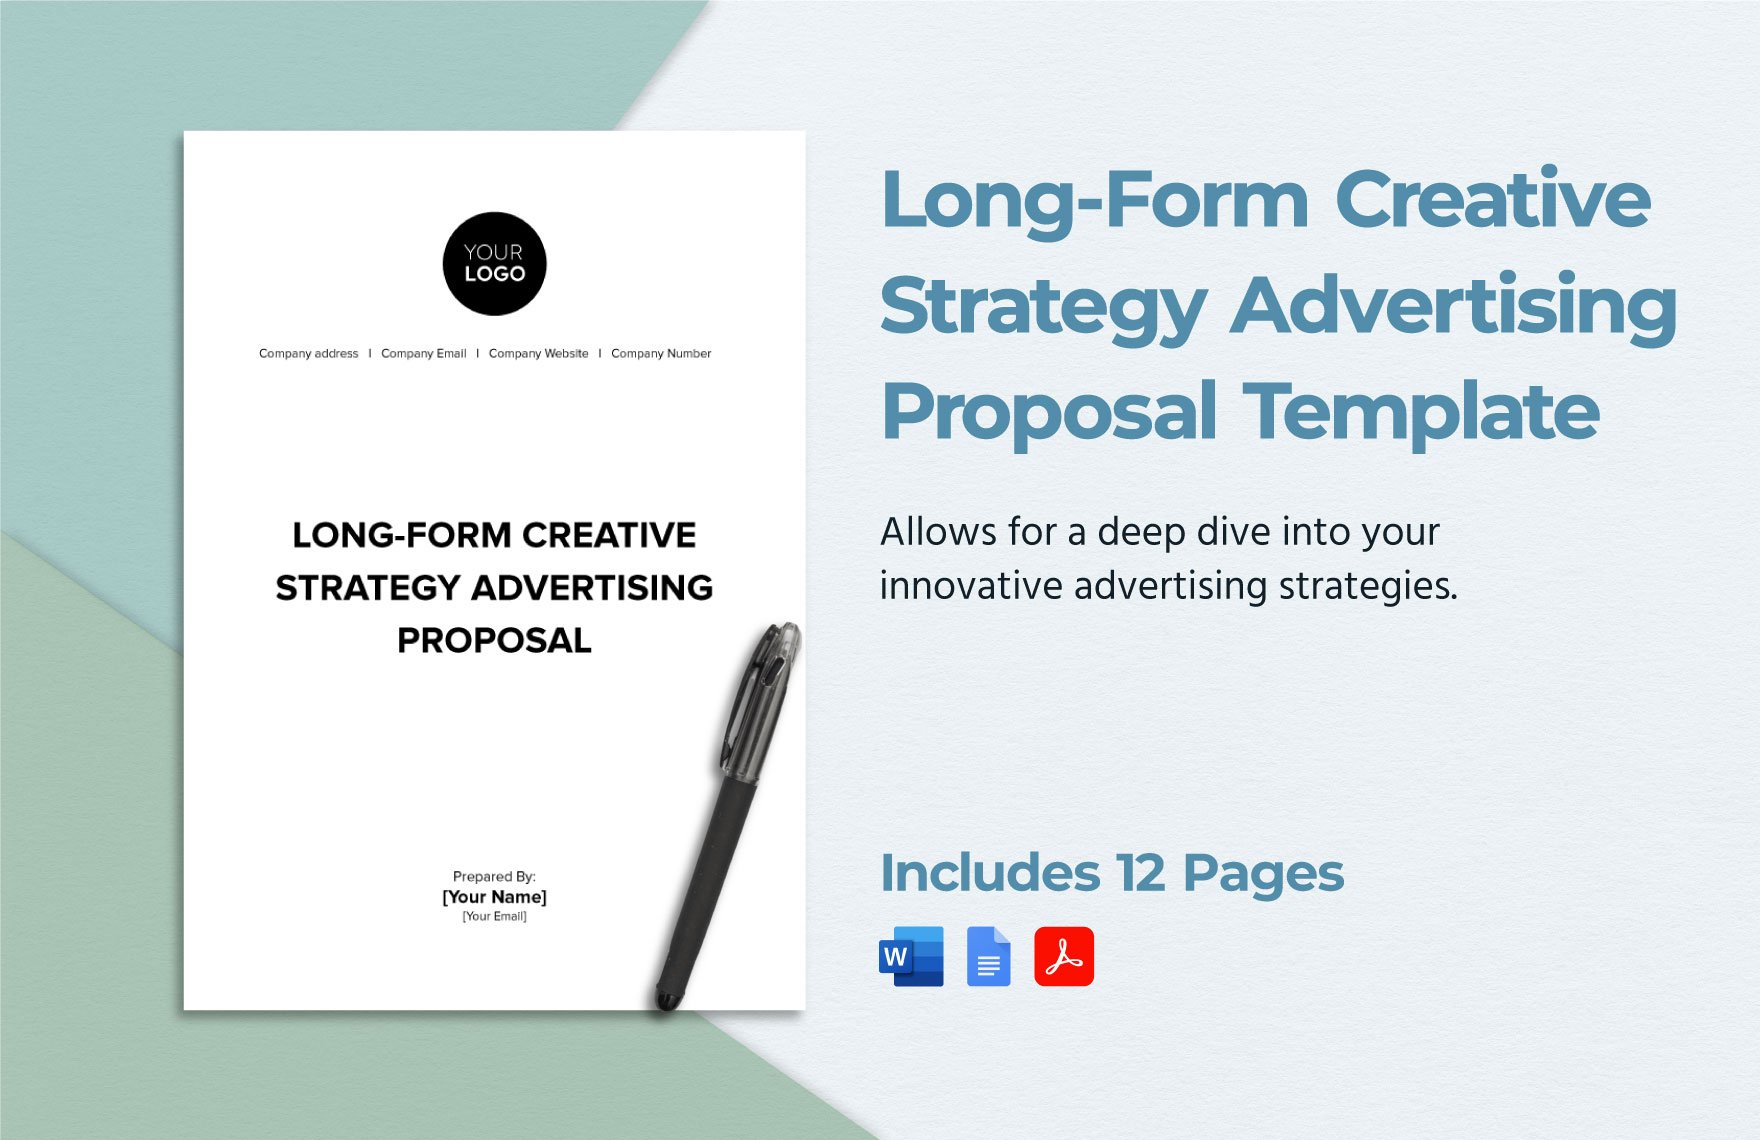 Long-Form Creative Strategy Advertising Proposal Template in Word, Google Docs, PDF